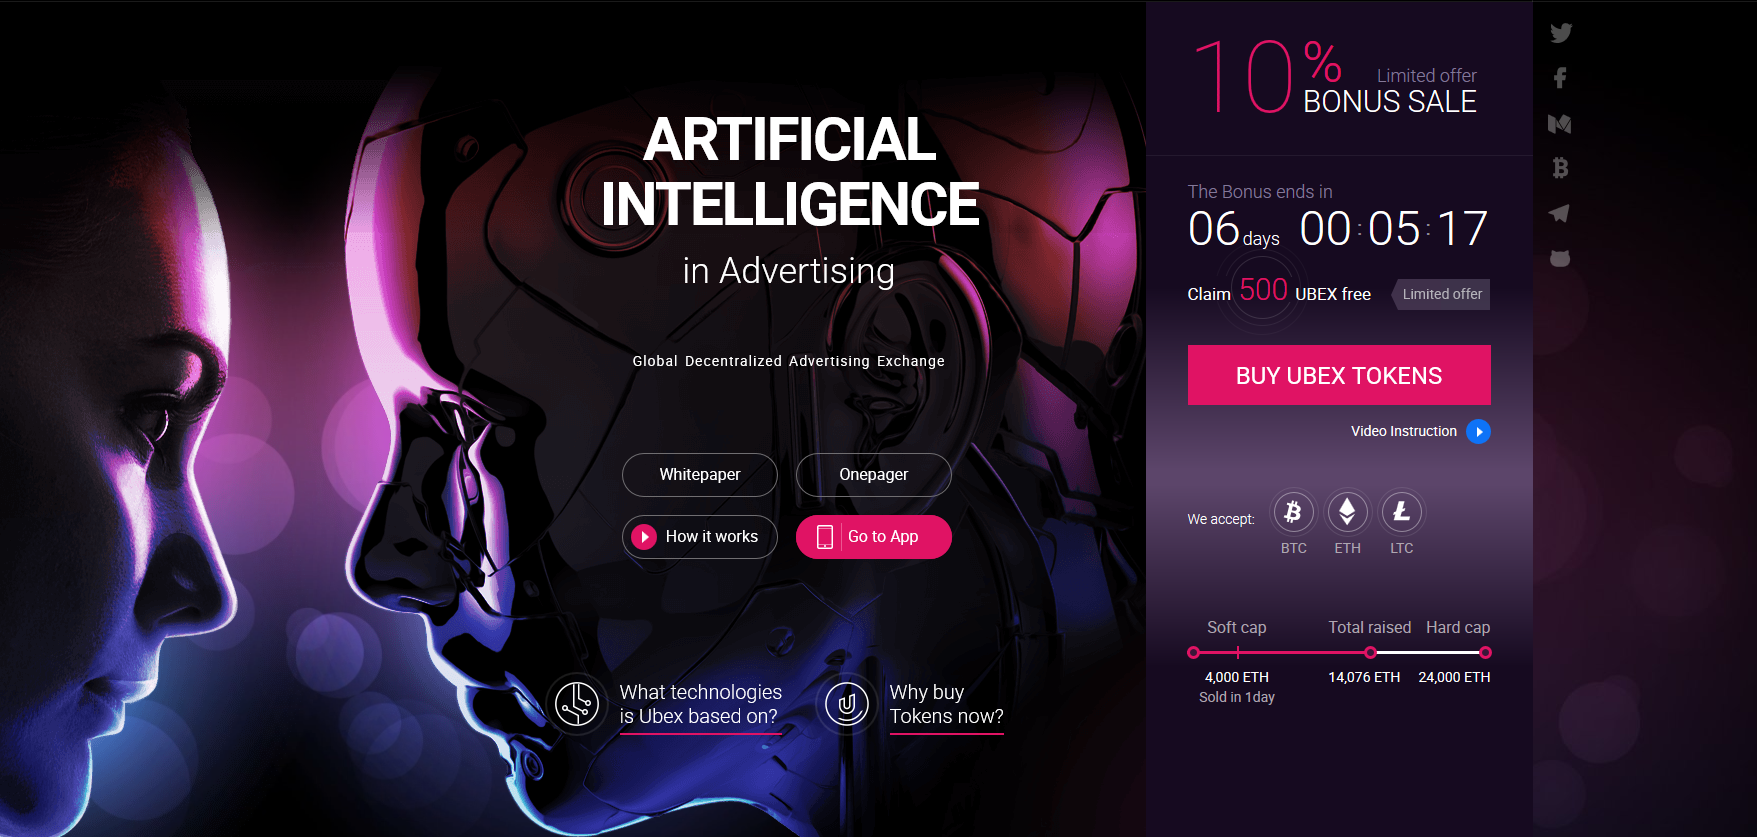 Screenshot-2018-6-26 Ubex - Artificial Intelligence in Advertising.png